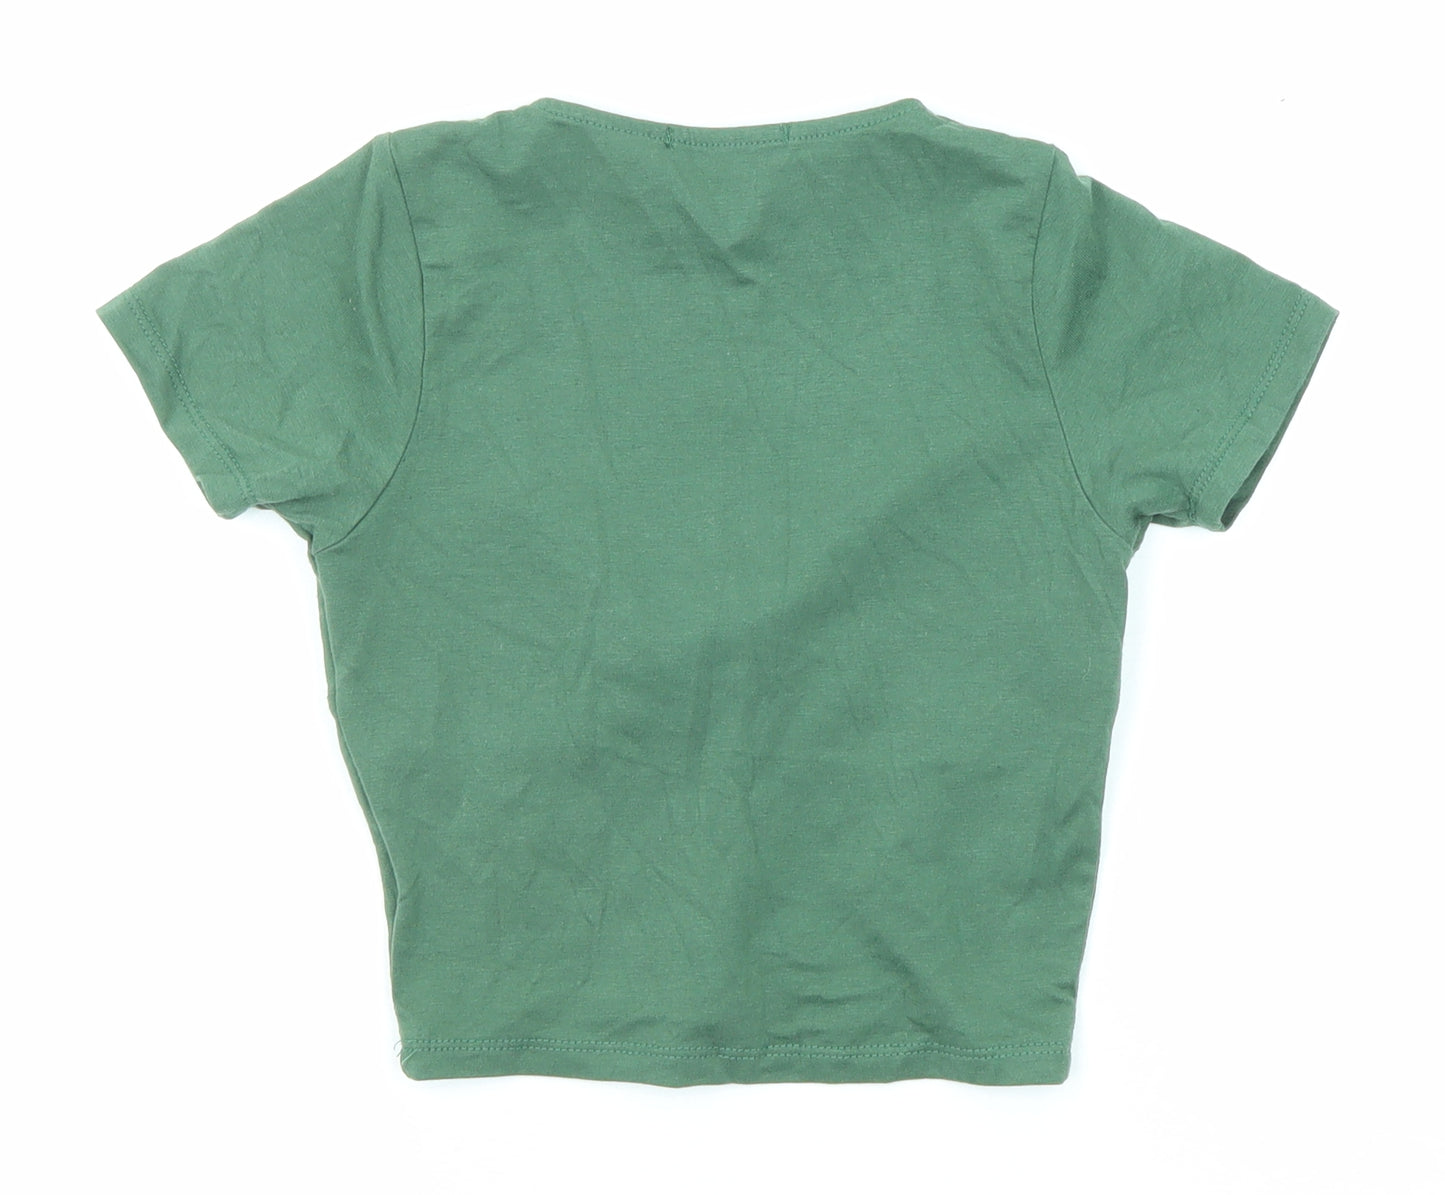 PRETTYLITTLETHING Womens Green Polyester Basic T-Shirt Size 6 Scoop Neck